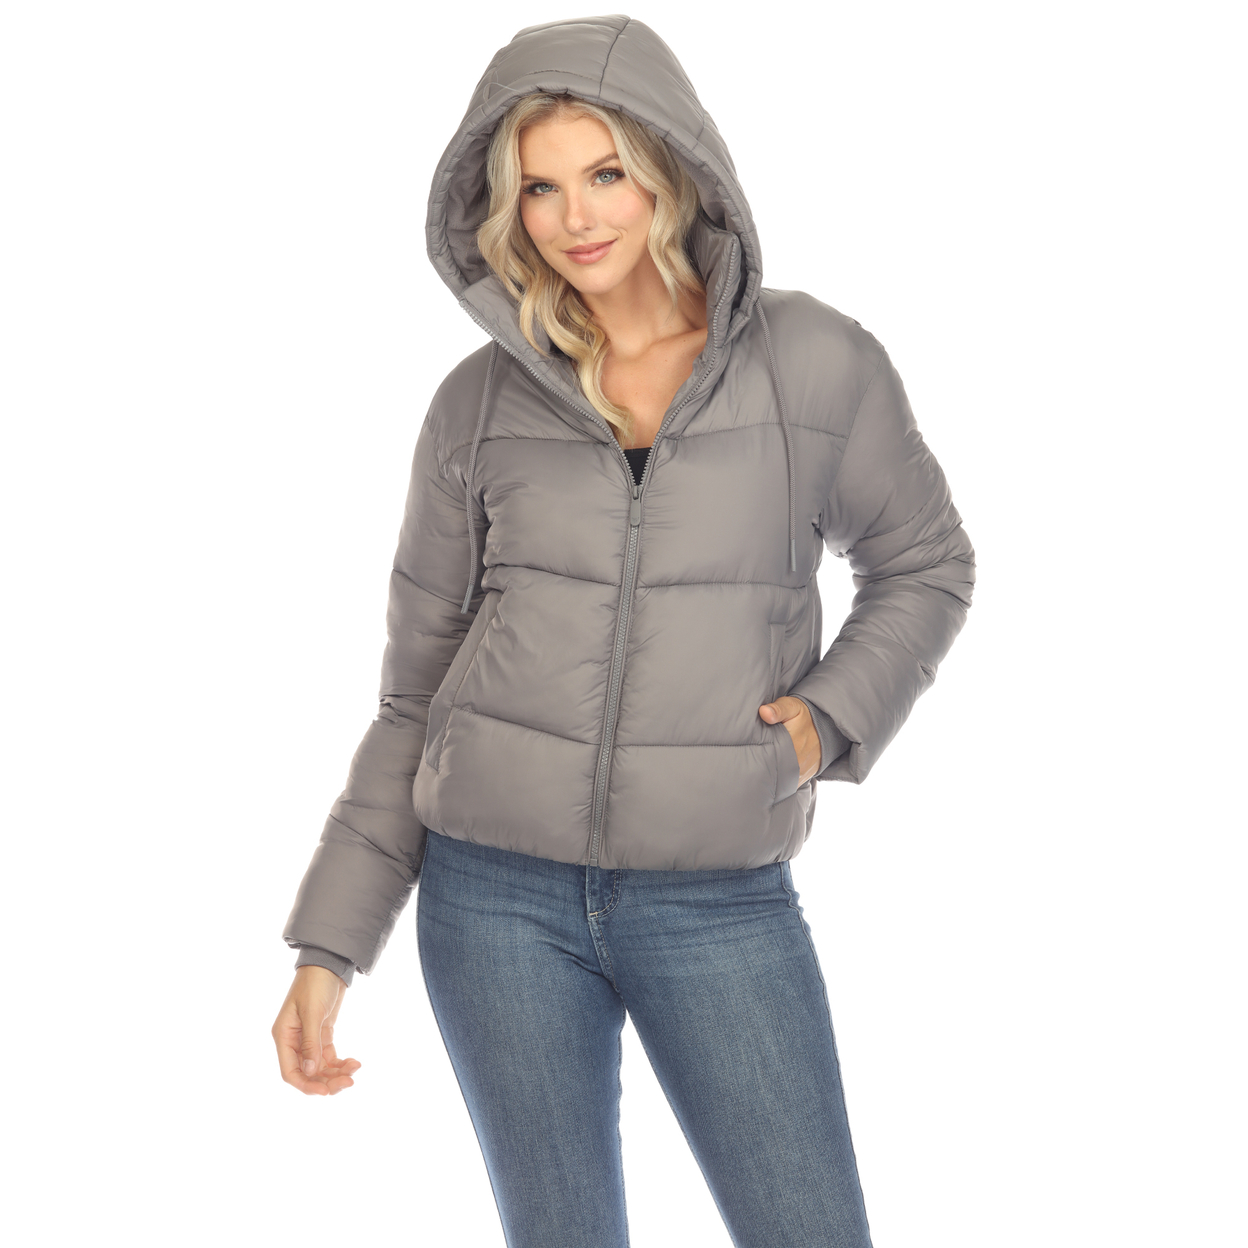 White Mark Women's Zip Hooded Puffer Jacket With Pockets - Gray, X-large